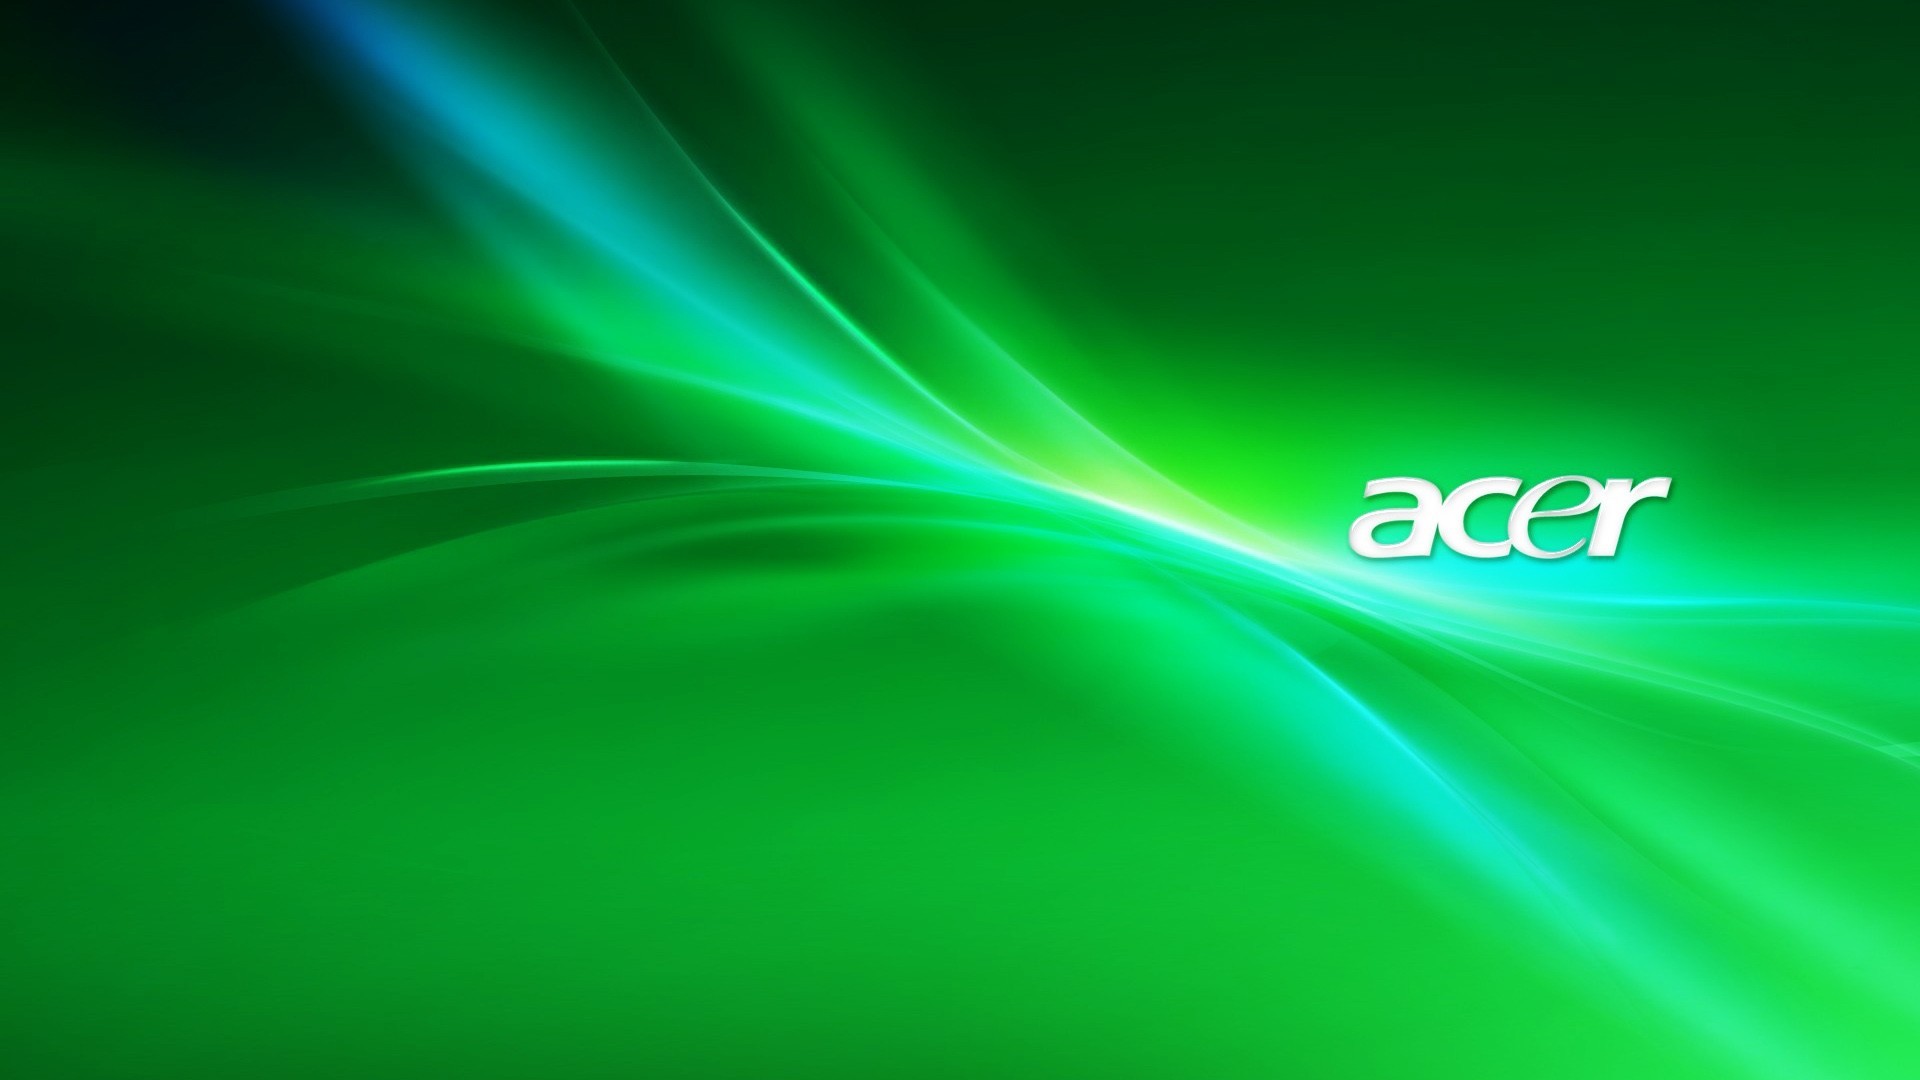 1920x1080 ... acer hd green wallpaper wallpaper 3d wallpapers with hd resolution ...